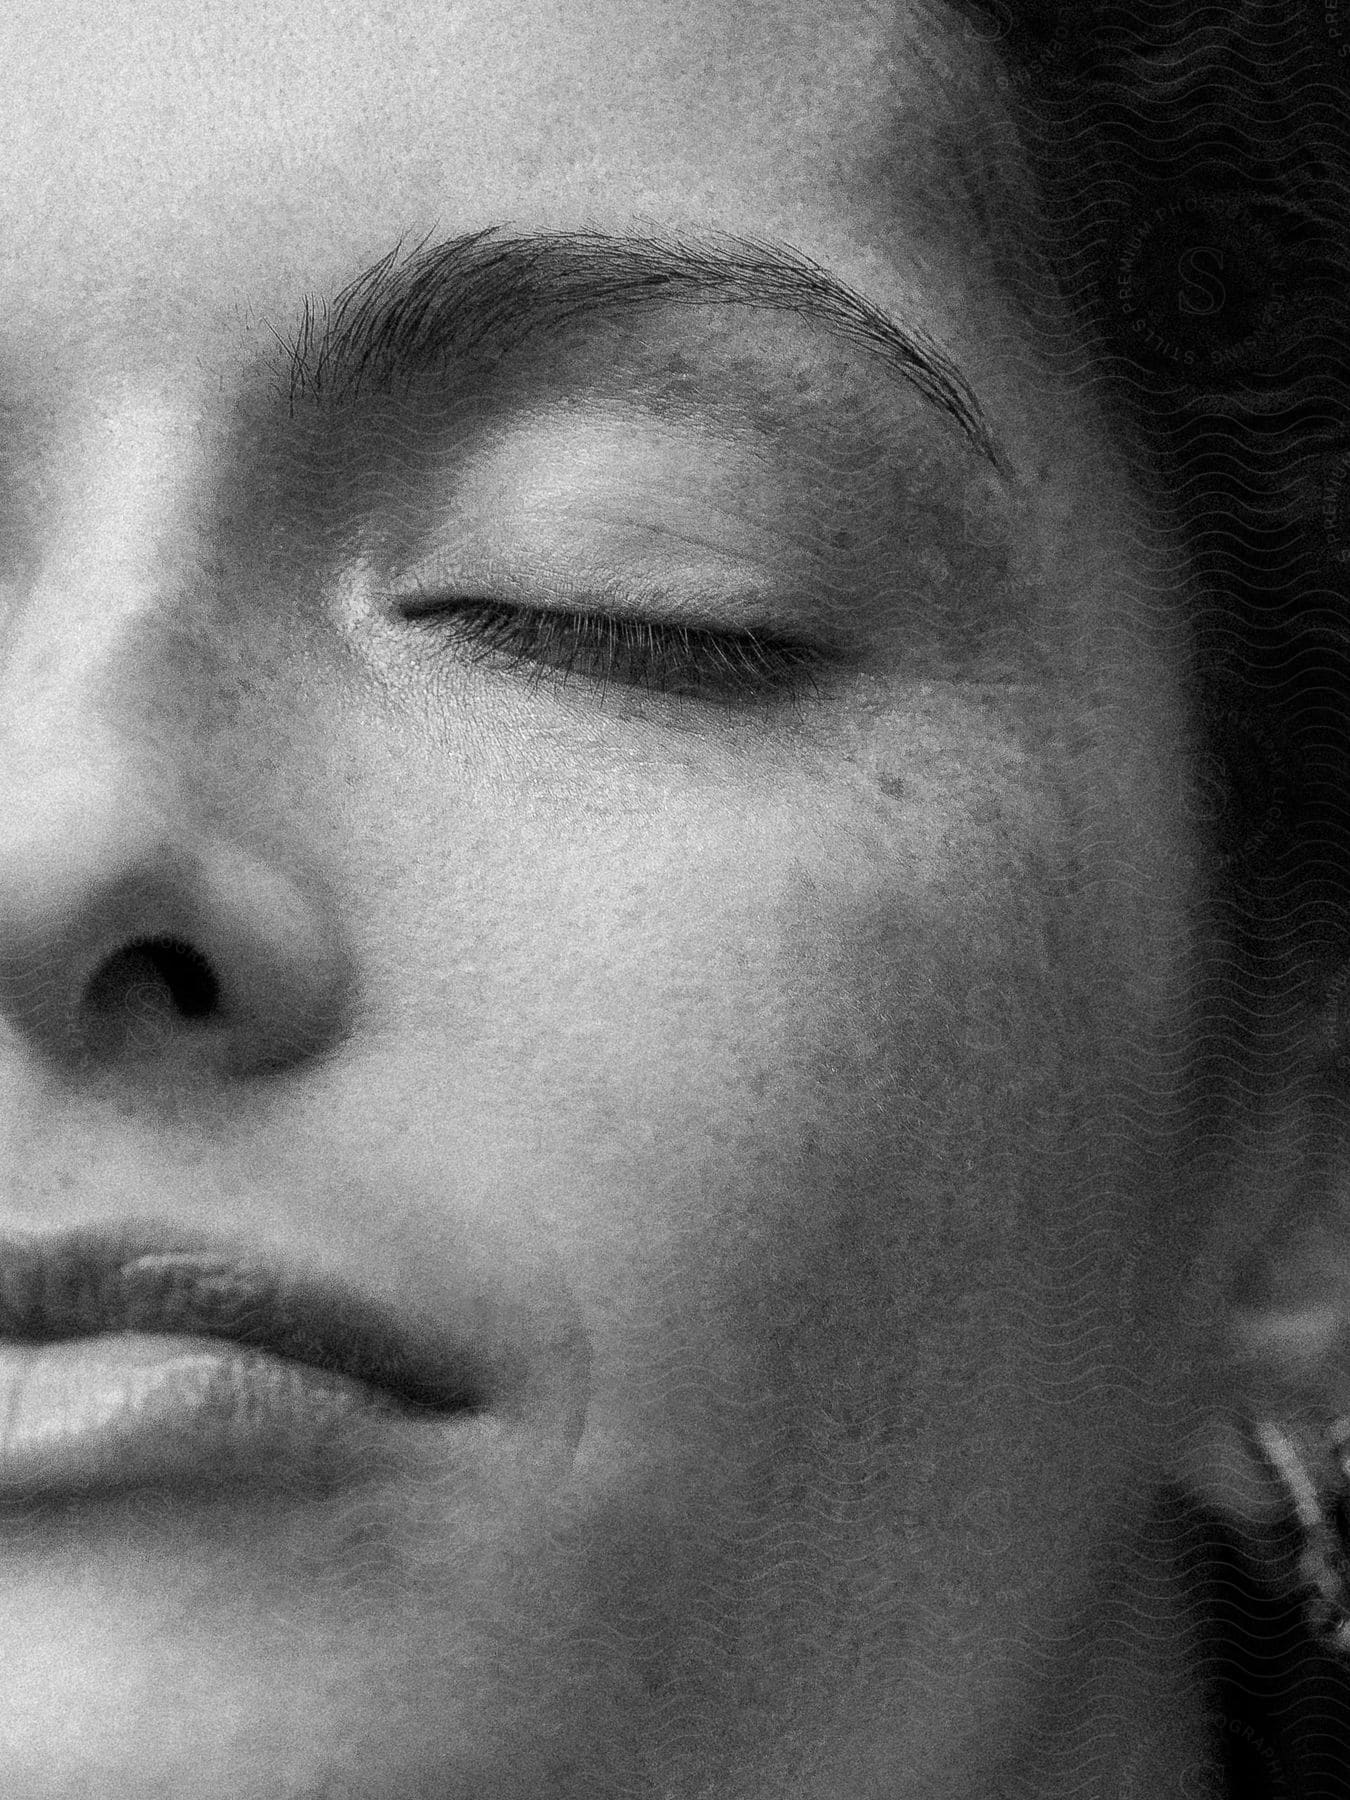 Close up of half of a woman's face with her eyes closed